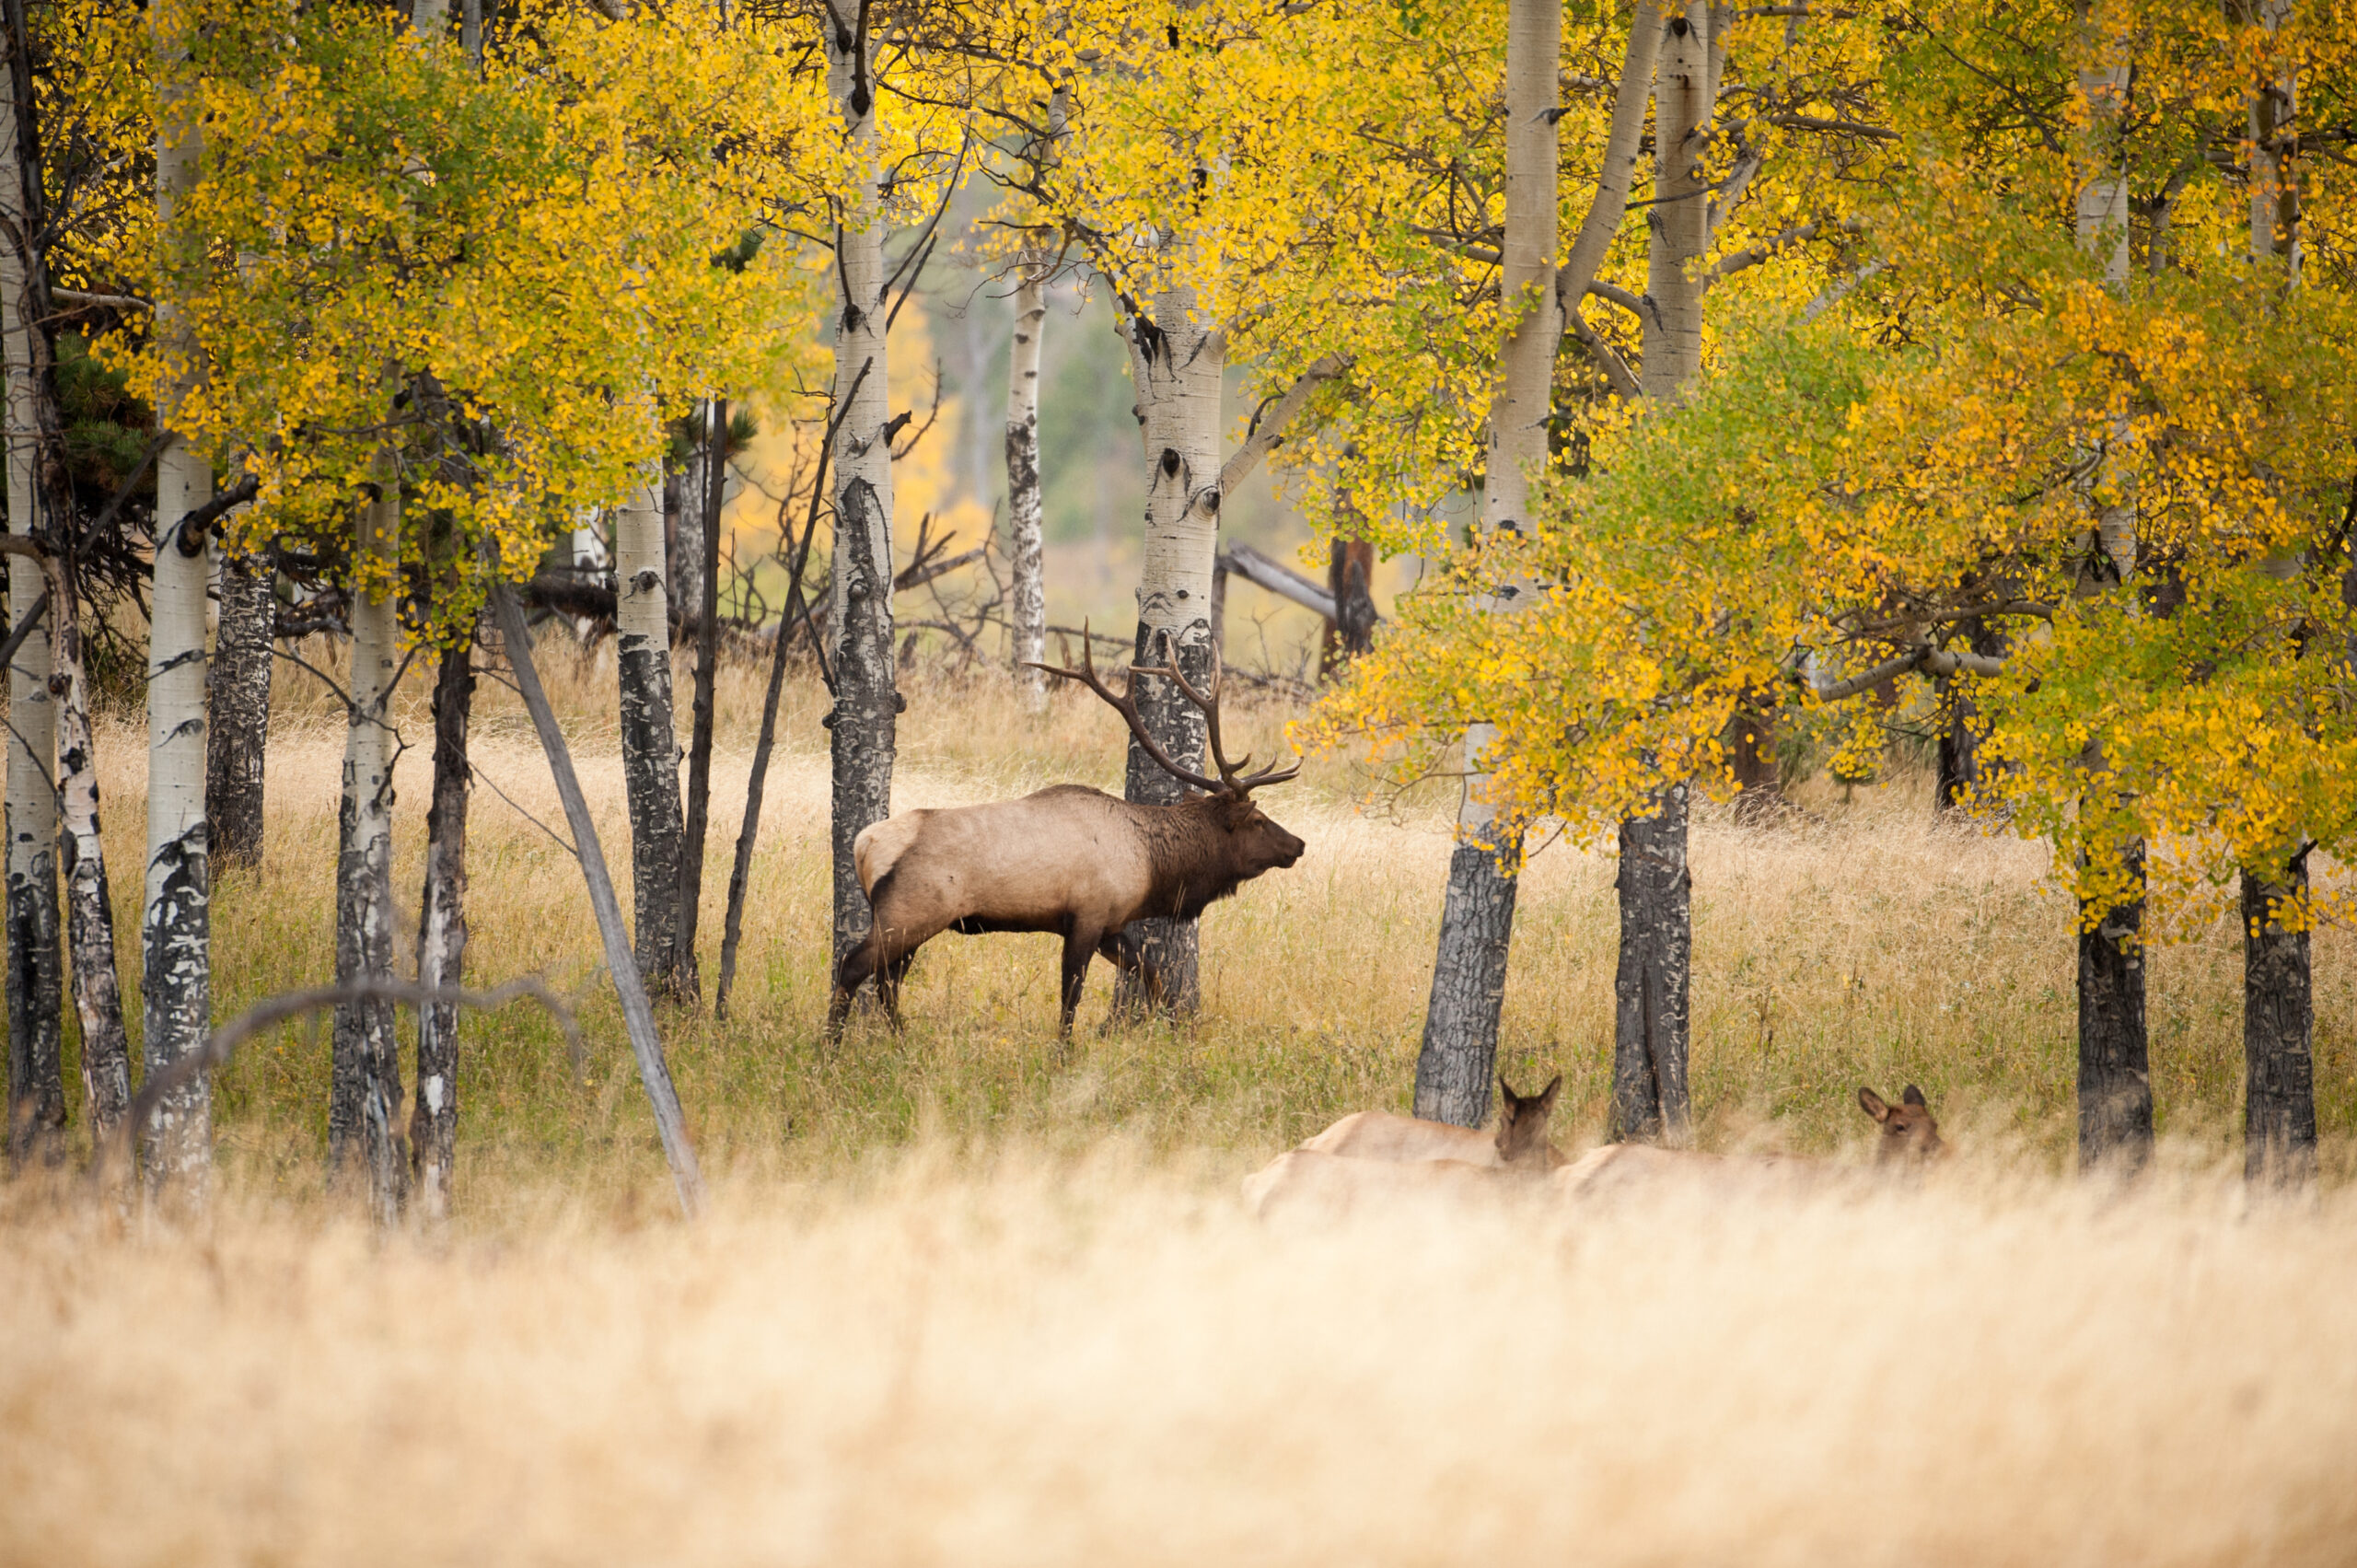 A bull elk paces under yellow aspen trees with cows bedded nearby.